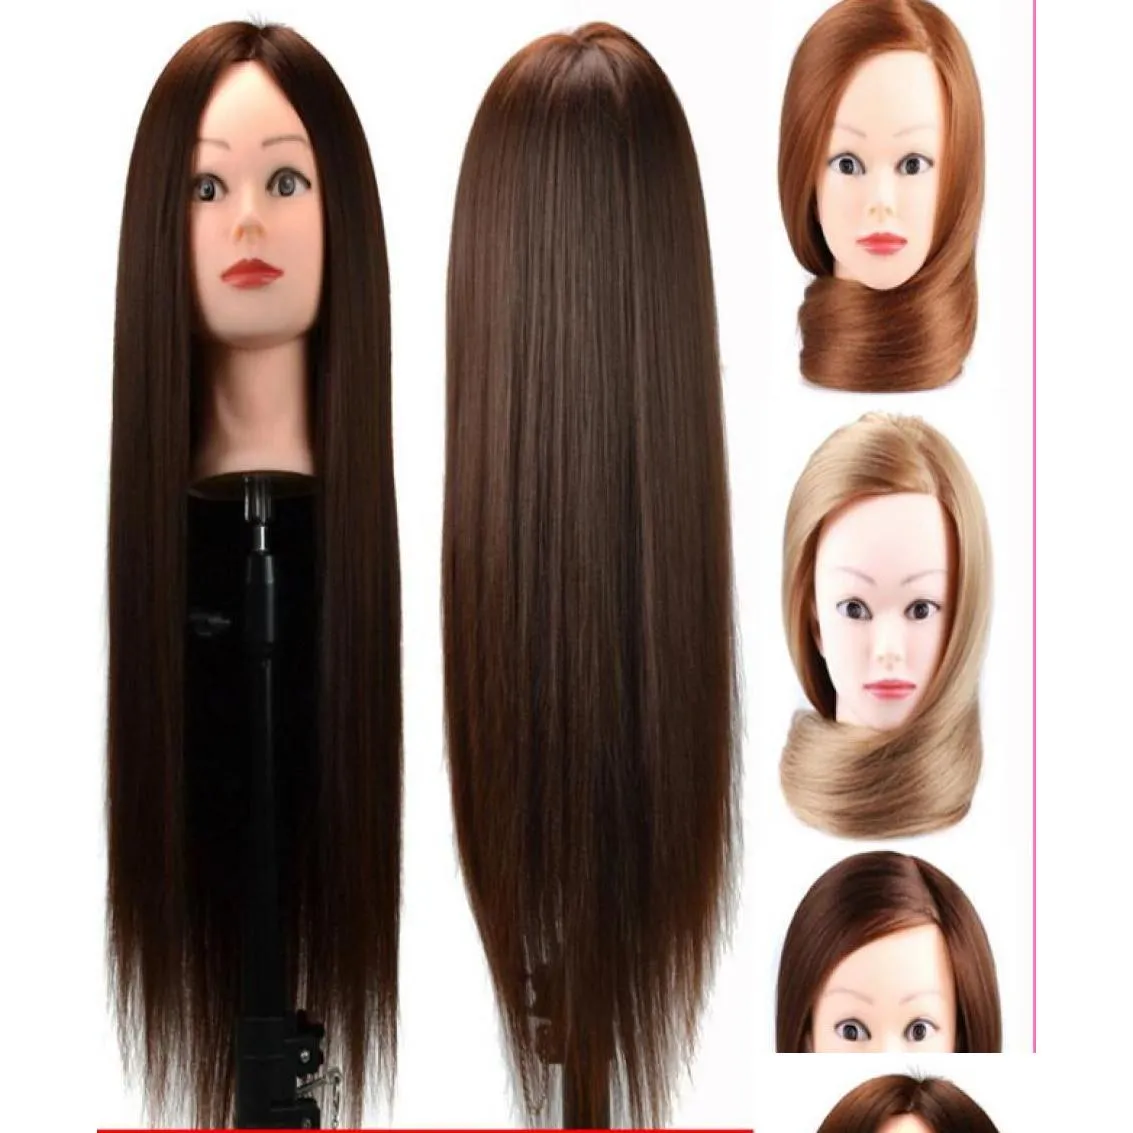 Synthtic hair Practice Hairdressing Training Head model Mannequin4745633